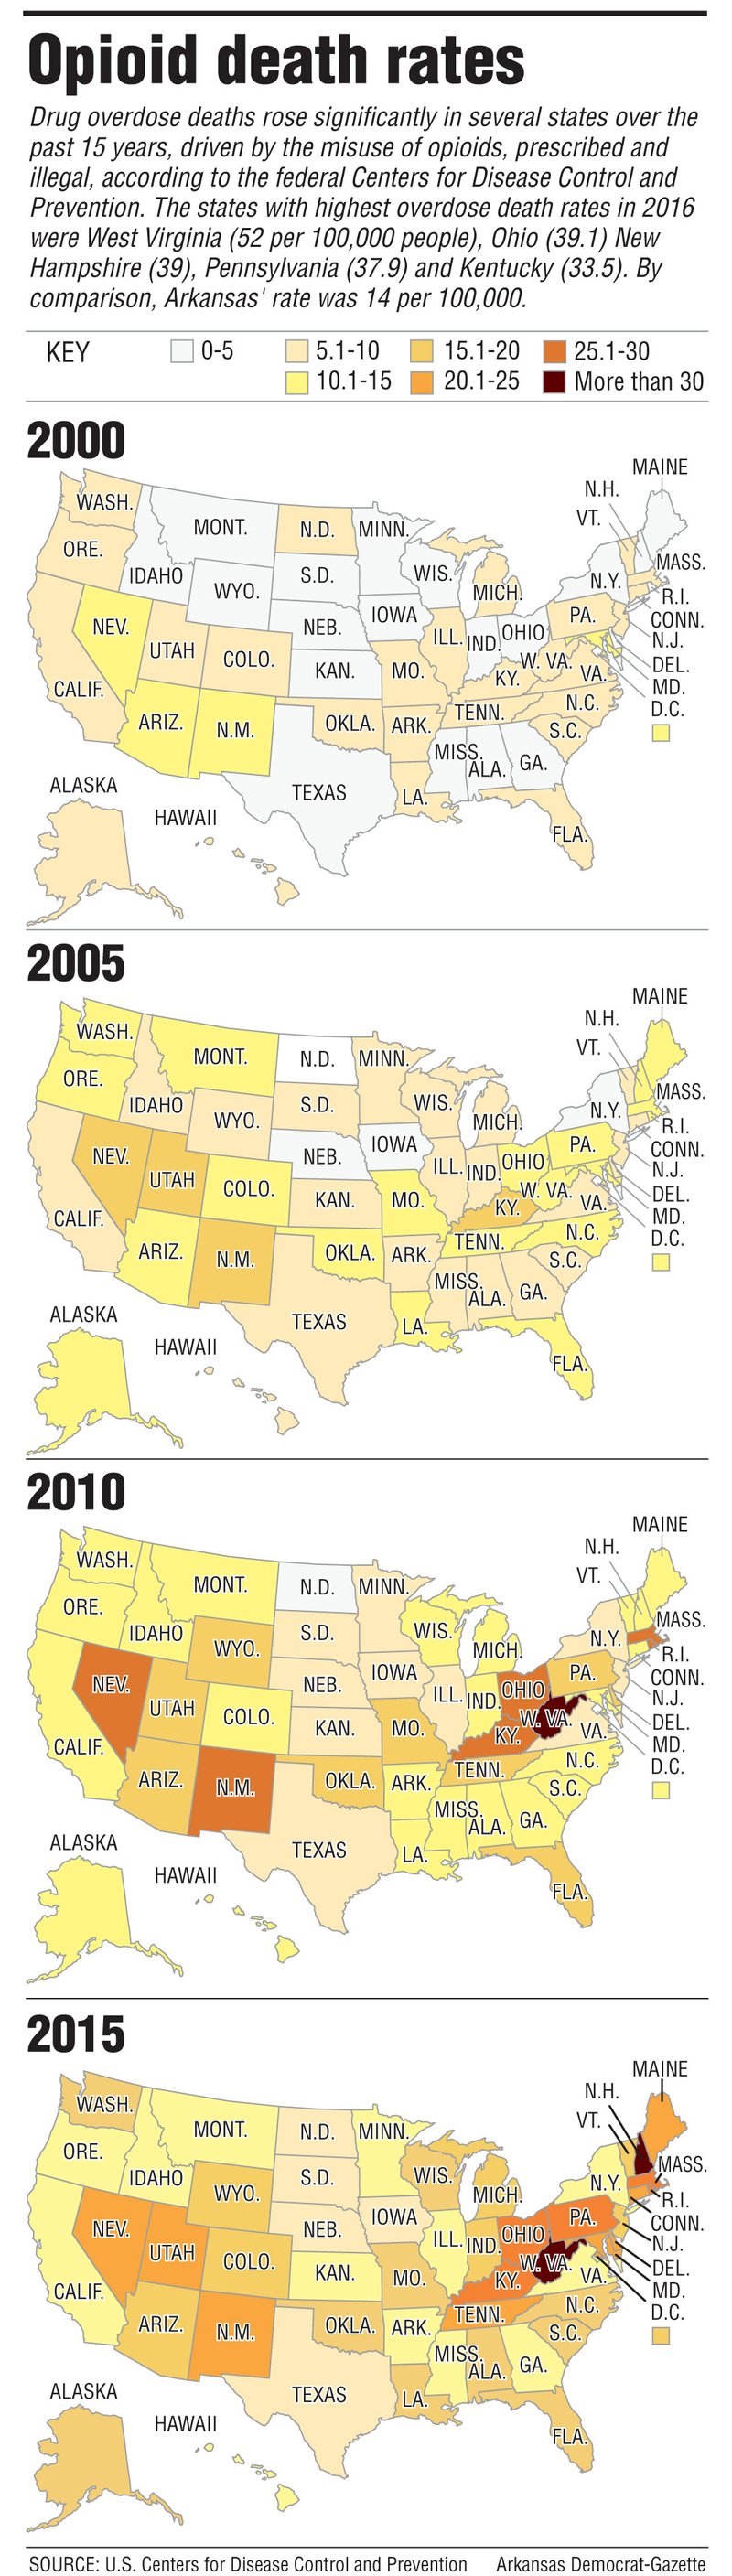 Maps showing opioid death rates 